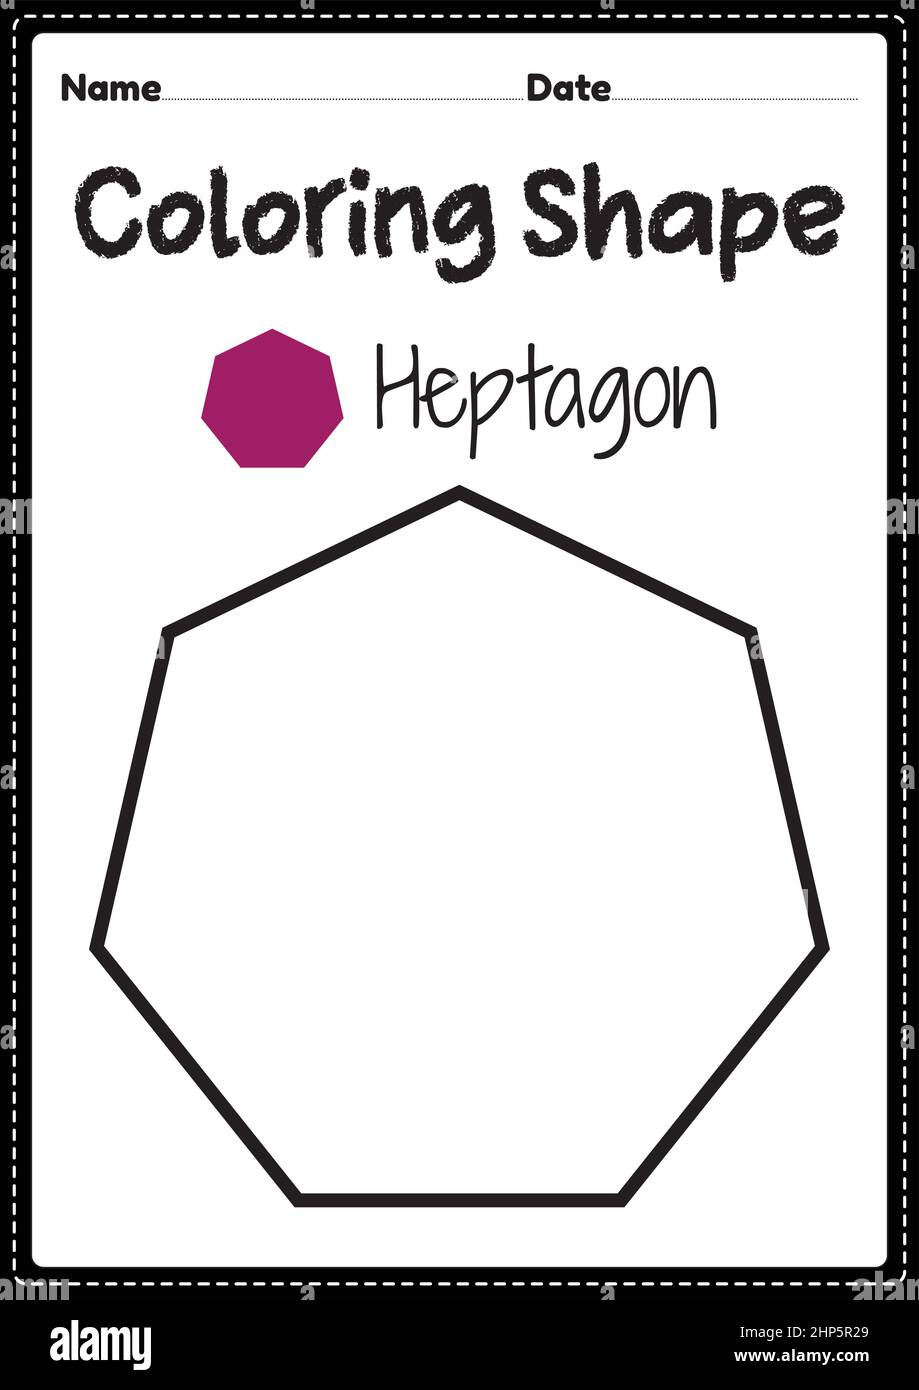 Heptagon coloring page for preschool, kindergarten & Montessori kids to practice visual art drawing and coloring activities to develop creativity, focus and motor skills. Stock Vector